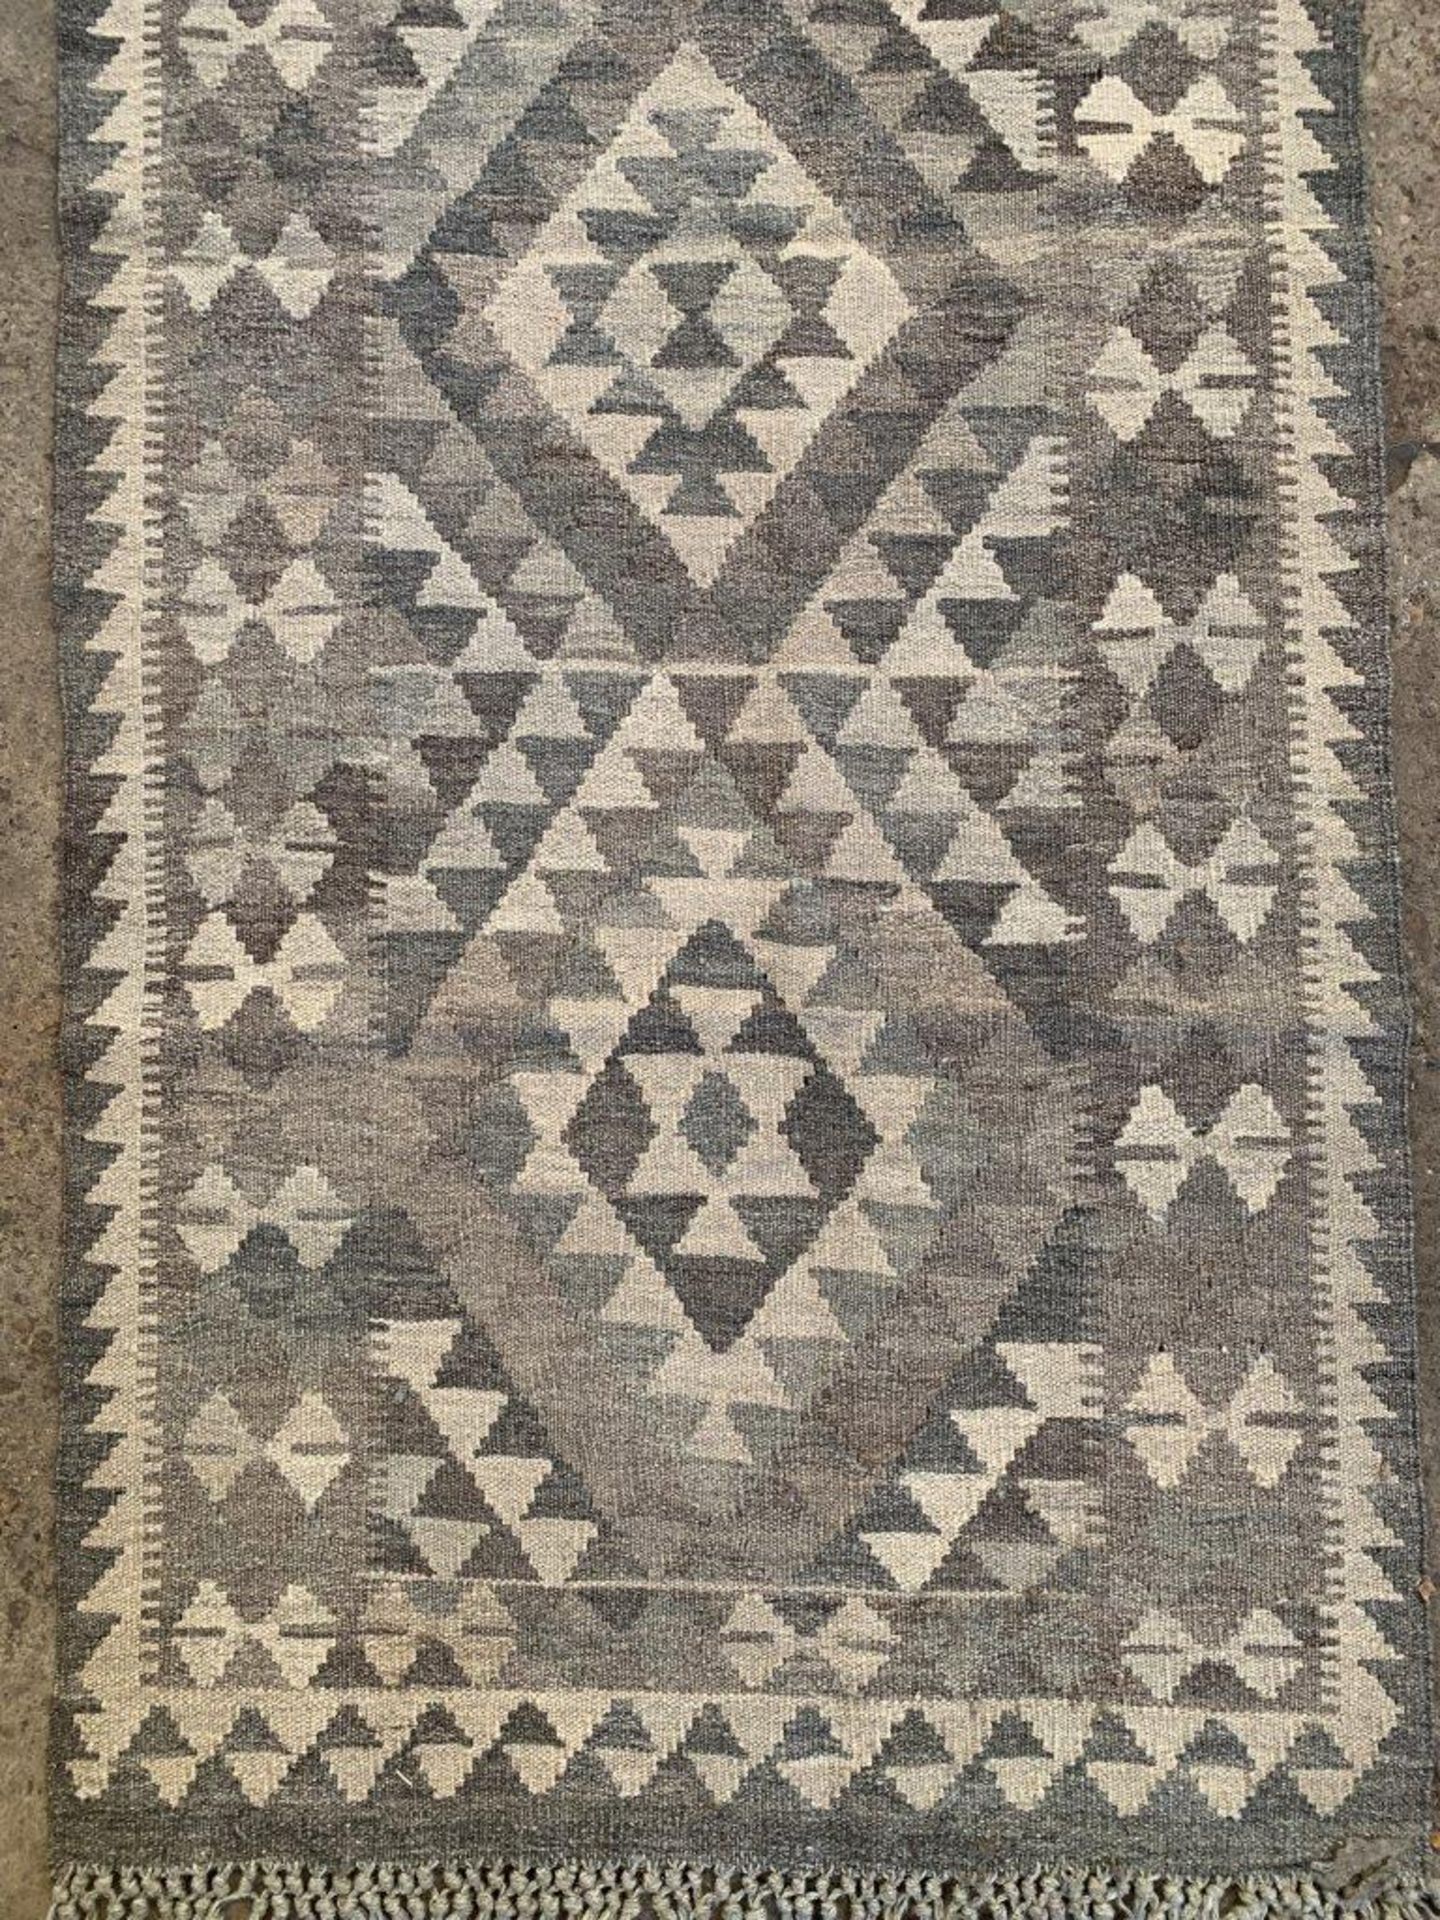 Two grey rugs - Image 4 of 6